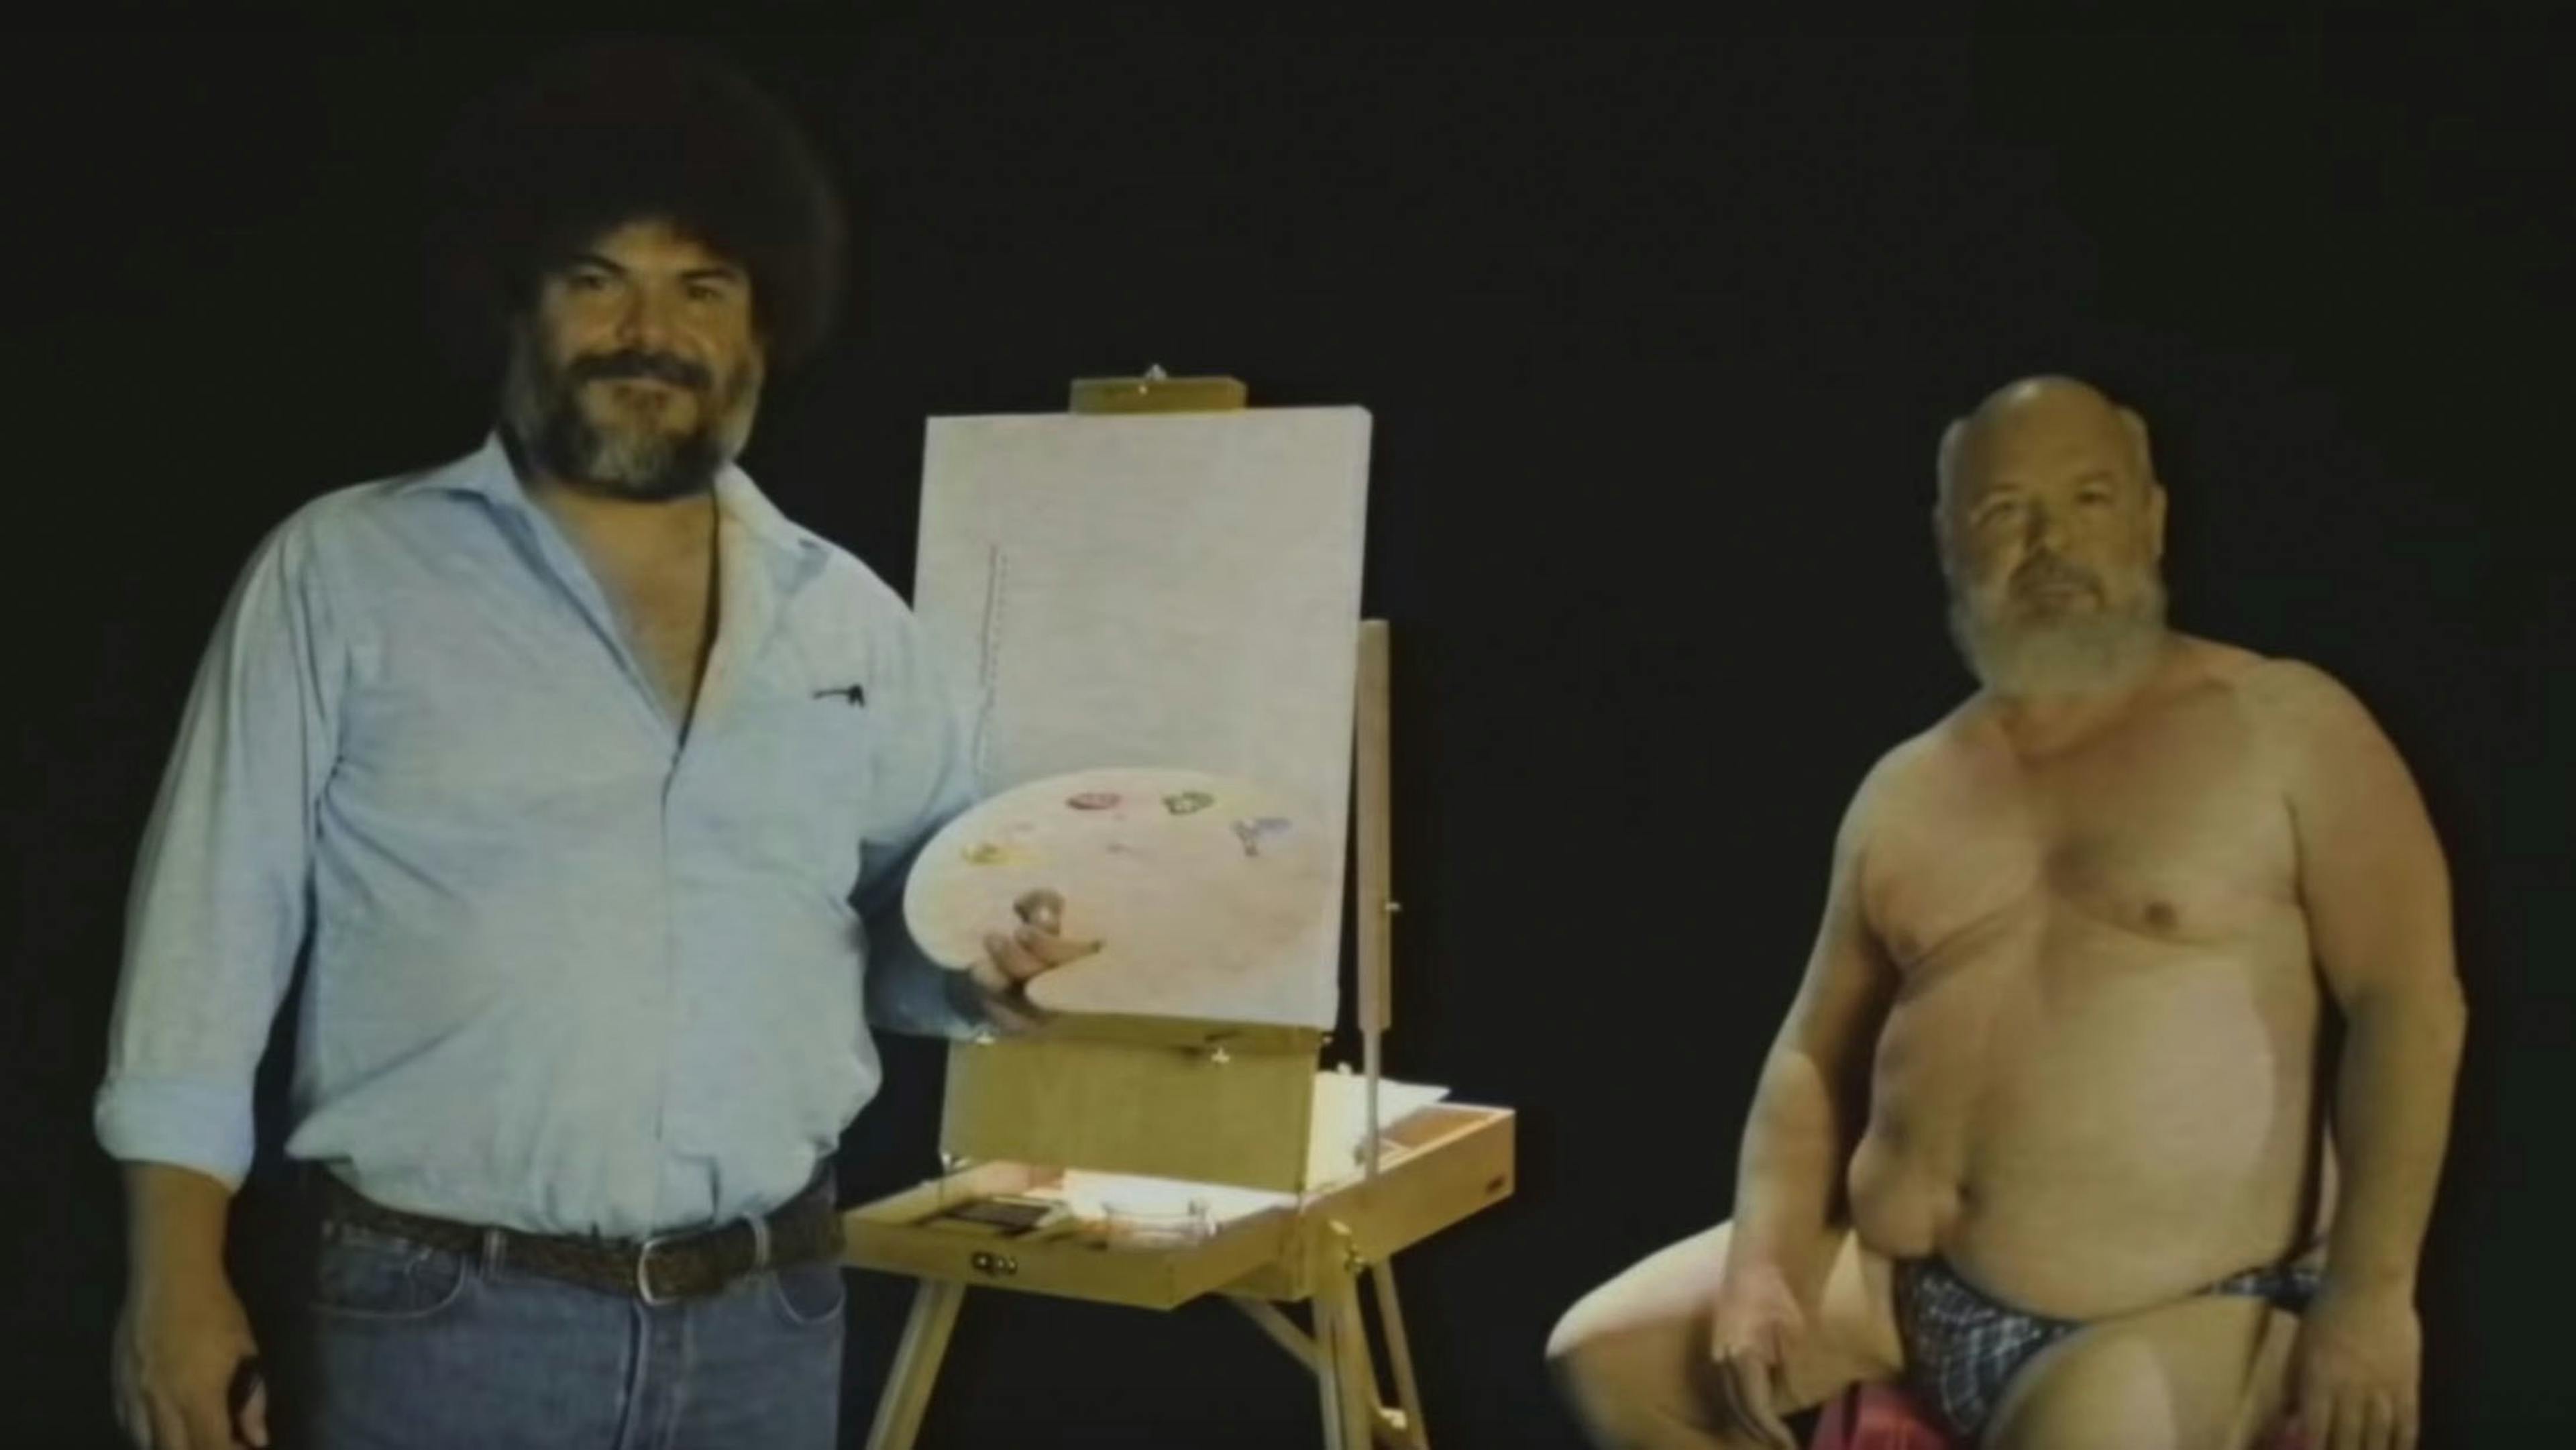 Tenacious D Want To Teach You To Draw, Bob Ross Style